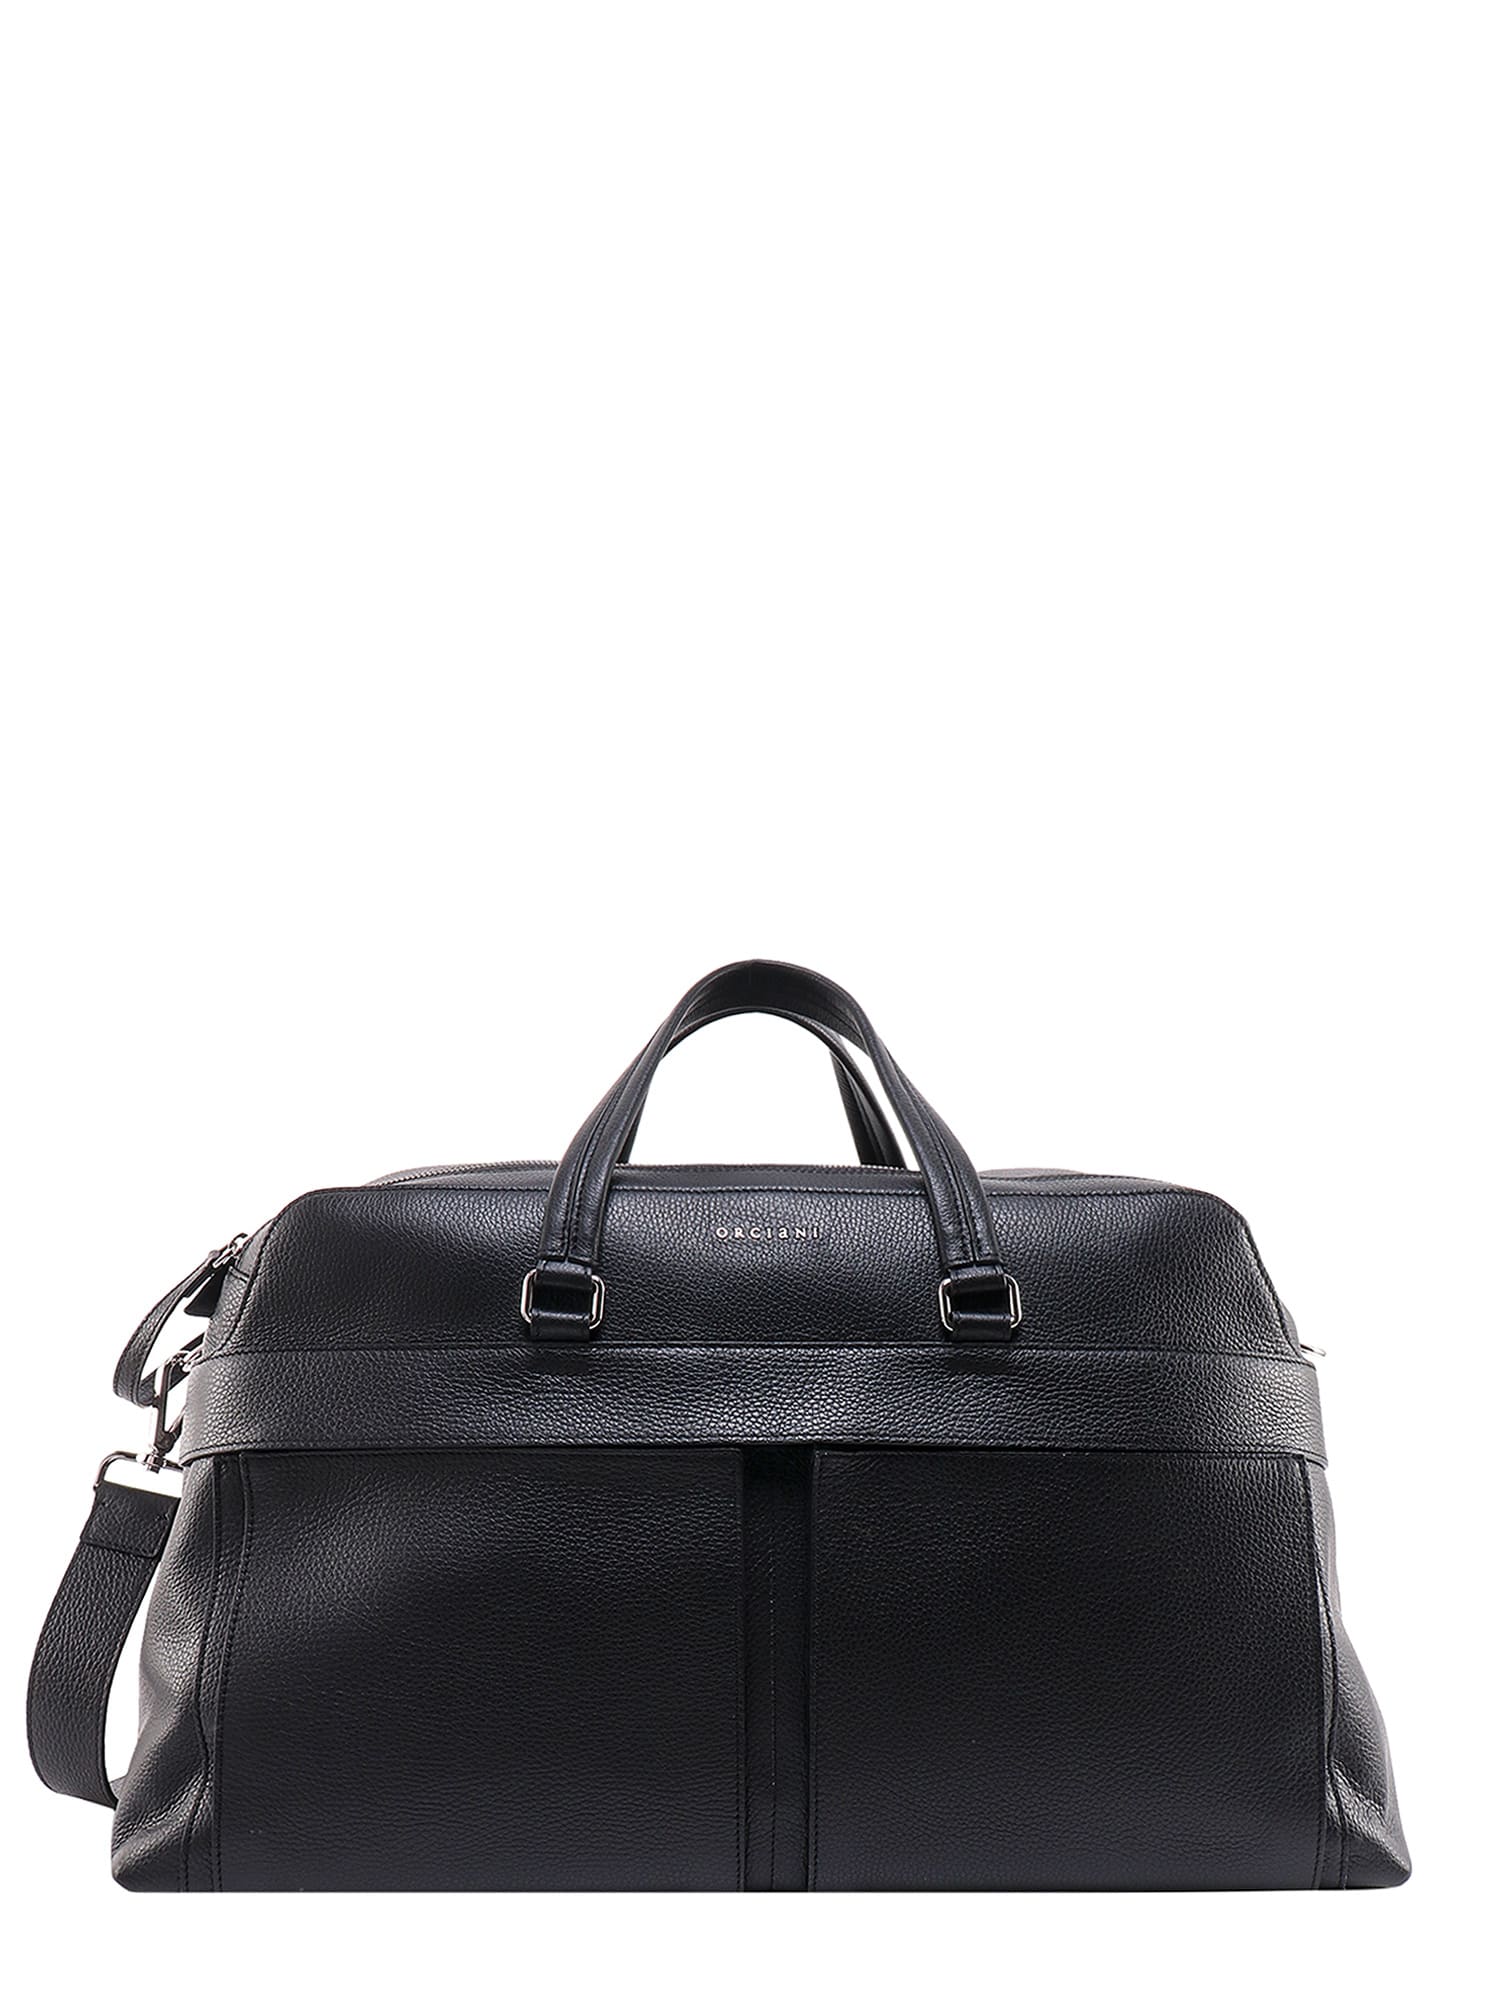 Shop Orciani Duffle Bag In Black